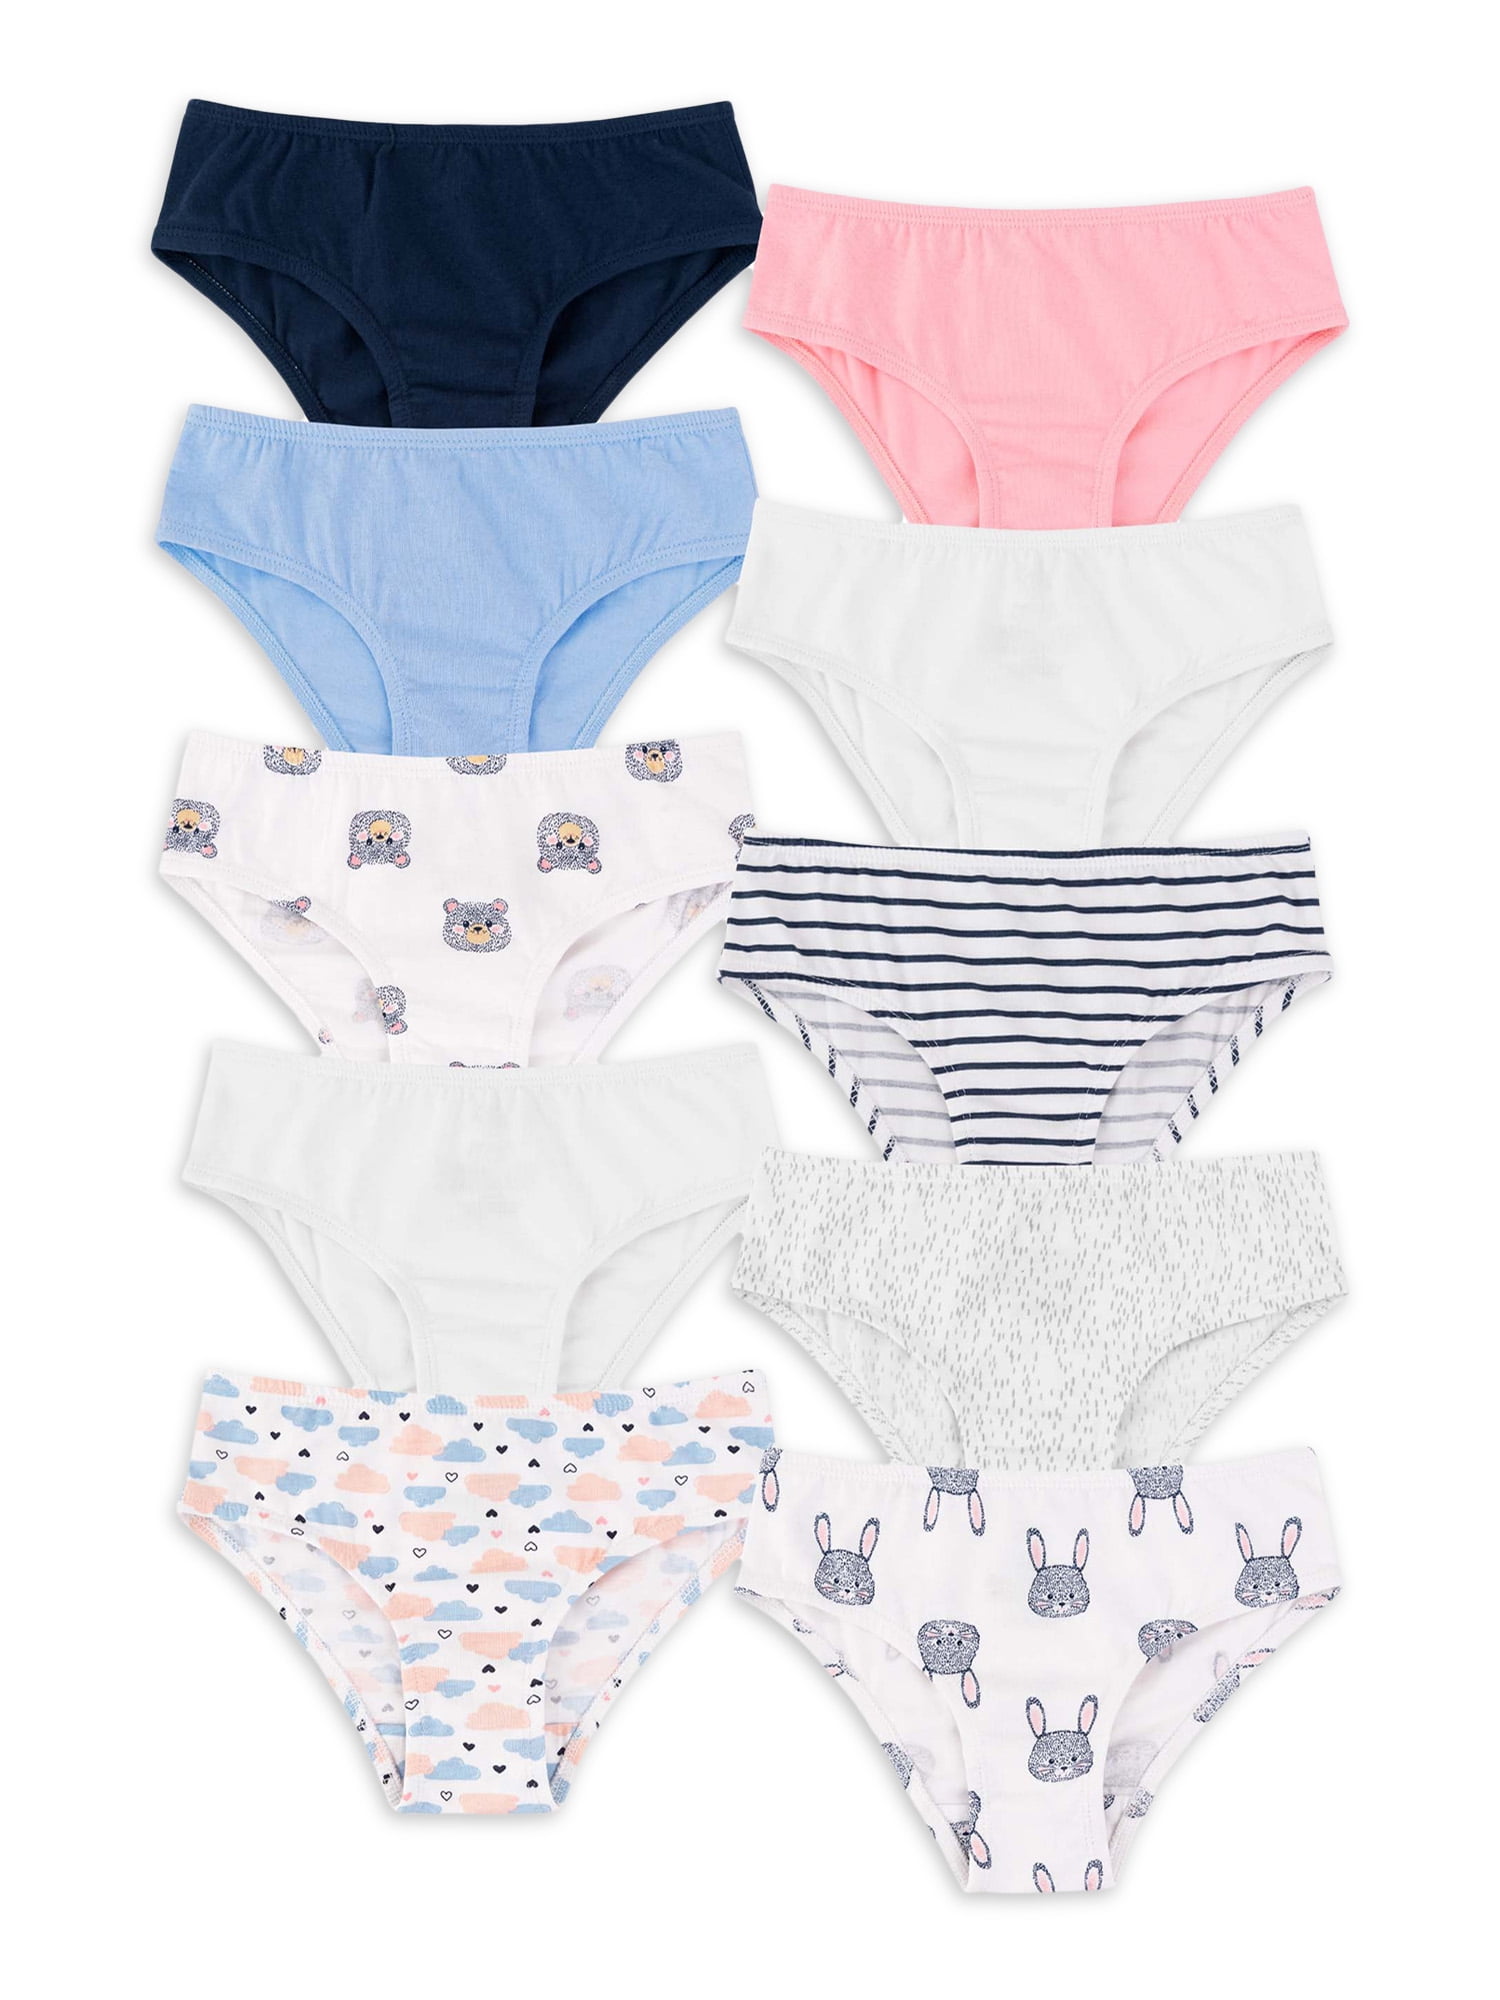 Wonder Nation Toddler Girls Hipsters, 10-Pack, Sizes 2T-5T